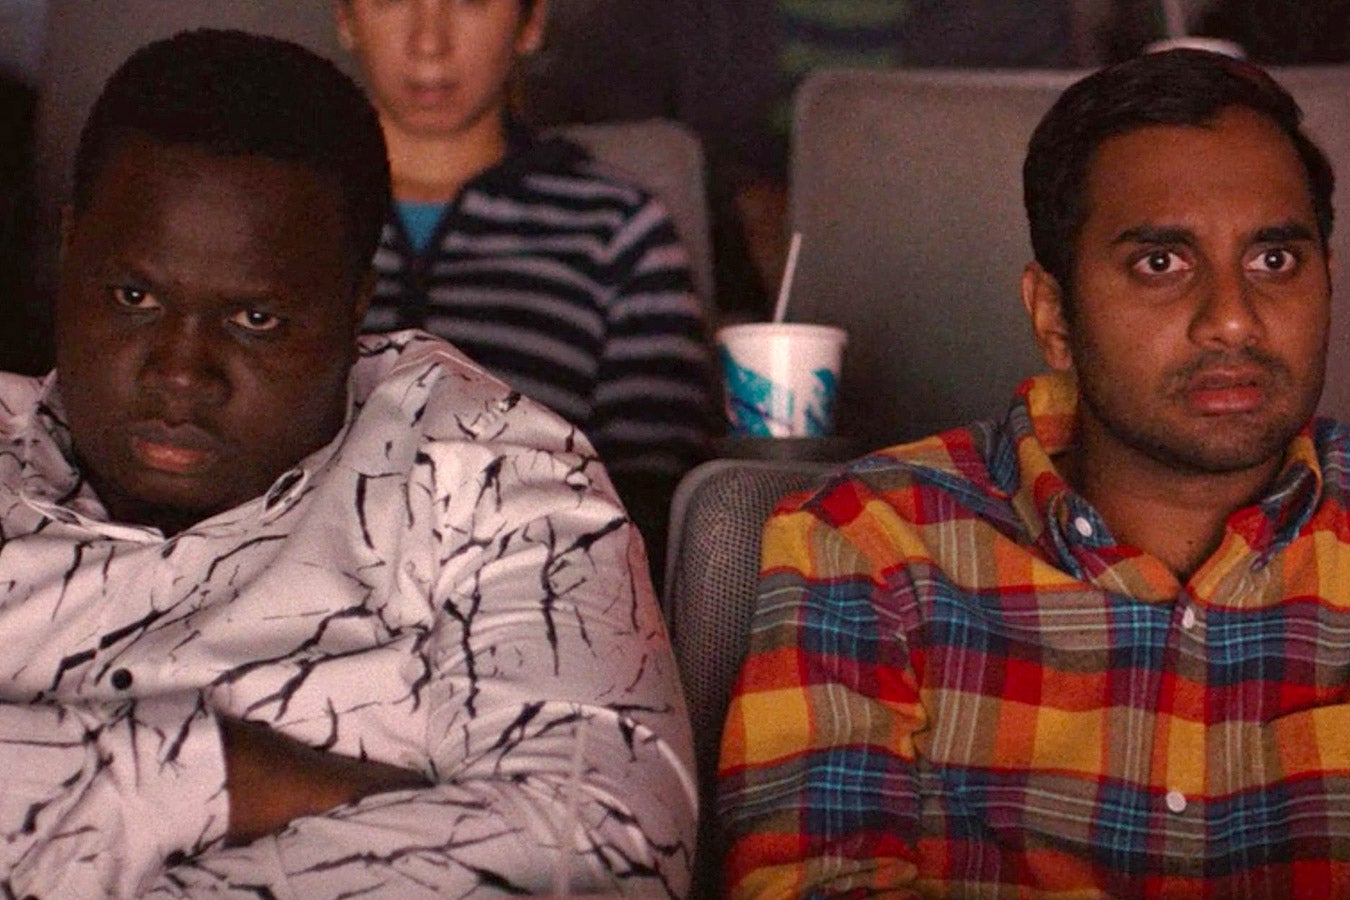 A Black man and an Indian American man sit in a movie theater and look ahead in dismay.